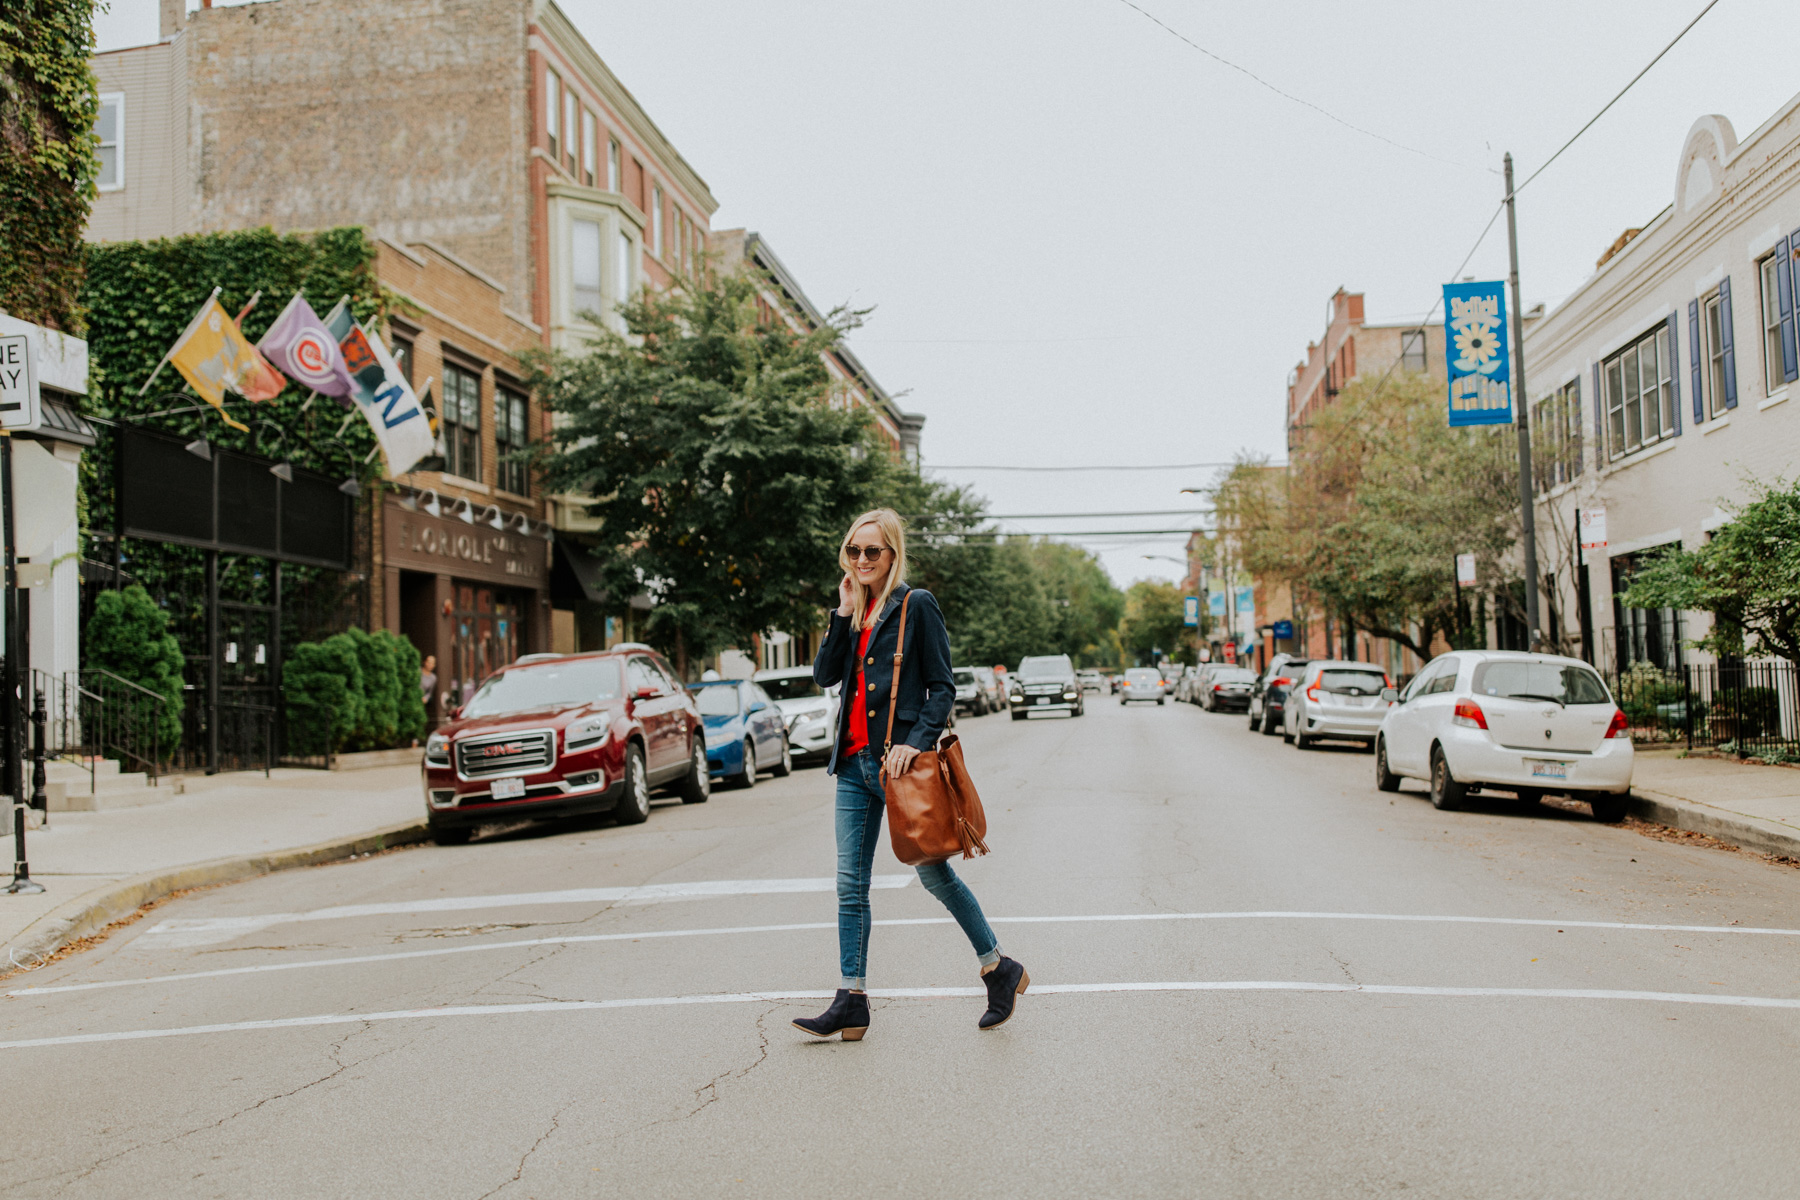 10 Things We Love About Fall - Chicago Fashion Blogger Kelly in the City